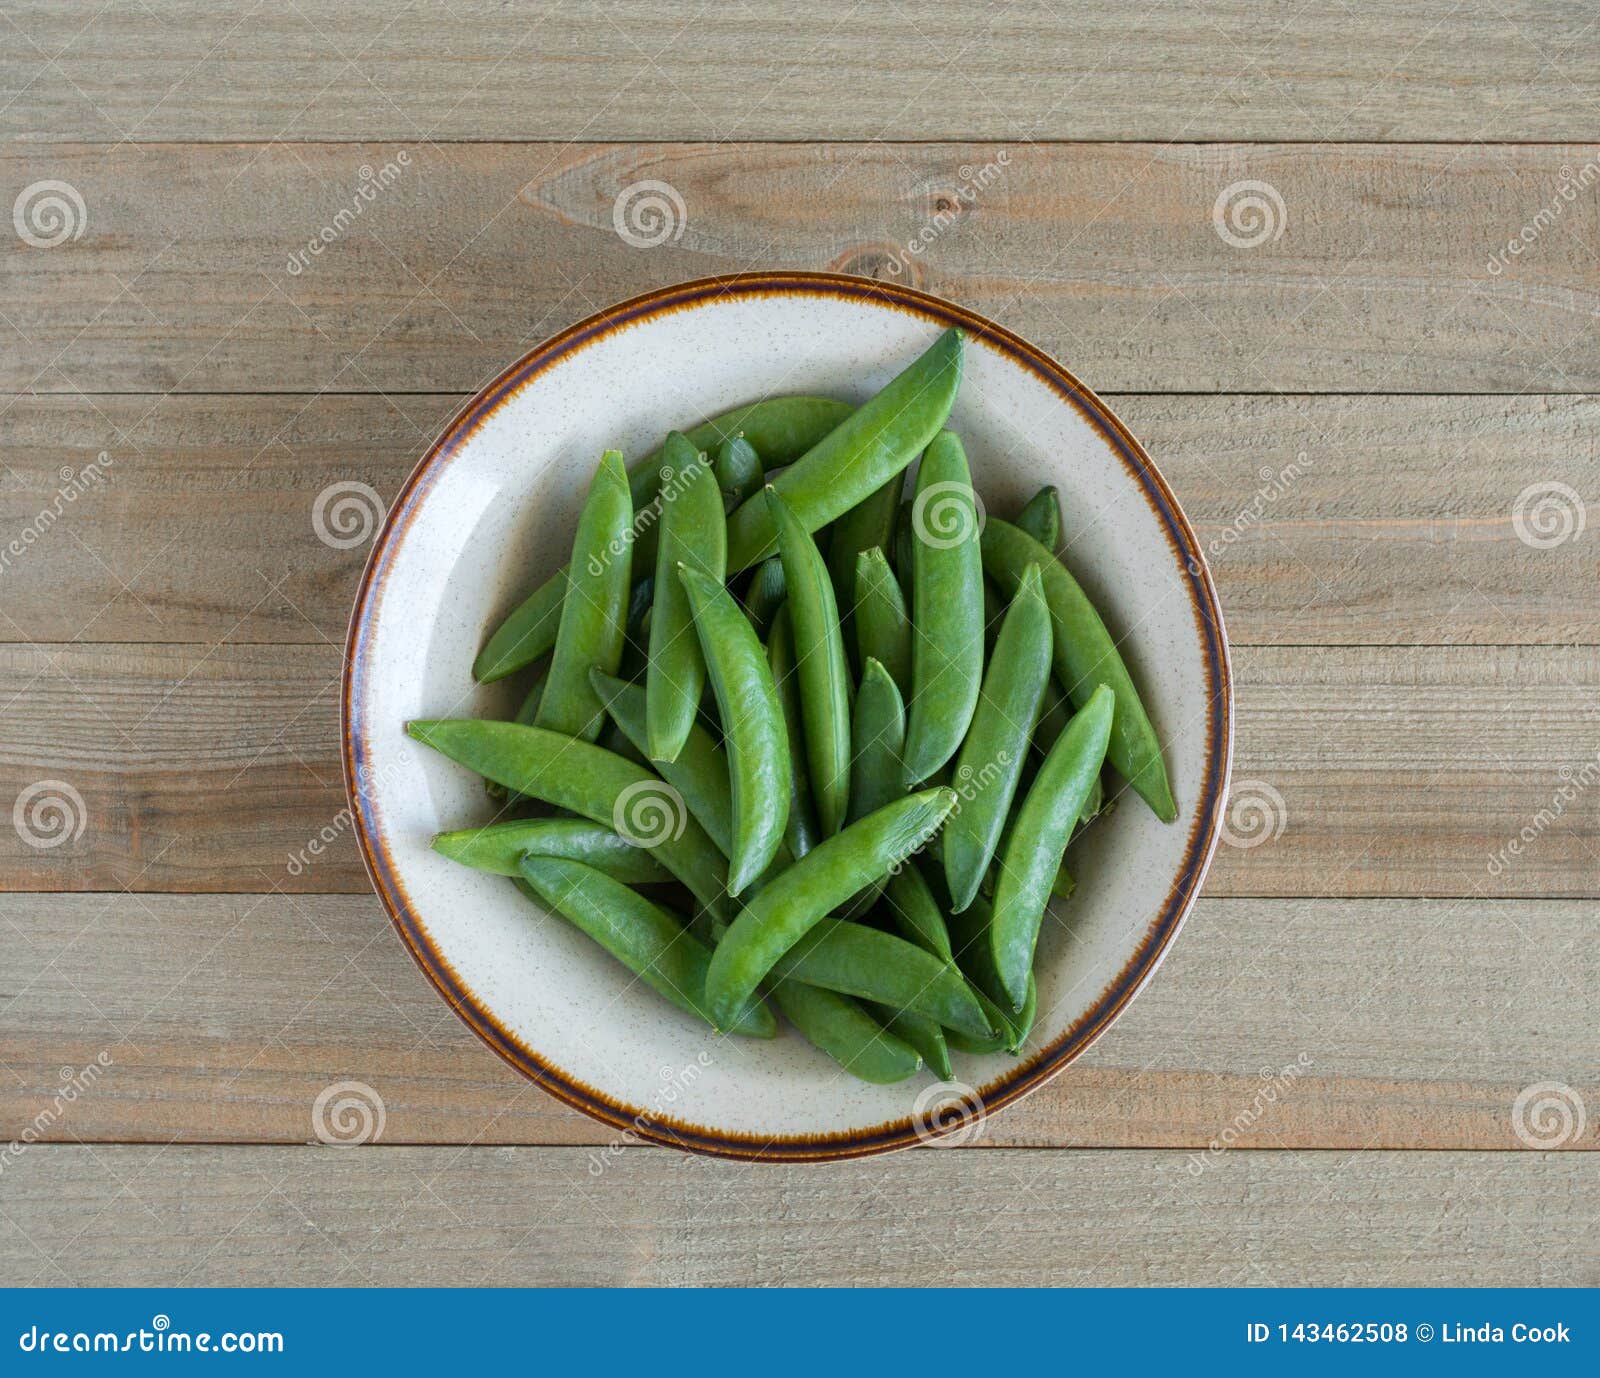 a bowl of sugar snap peas on a wood background